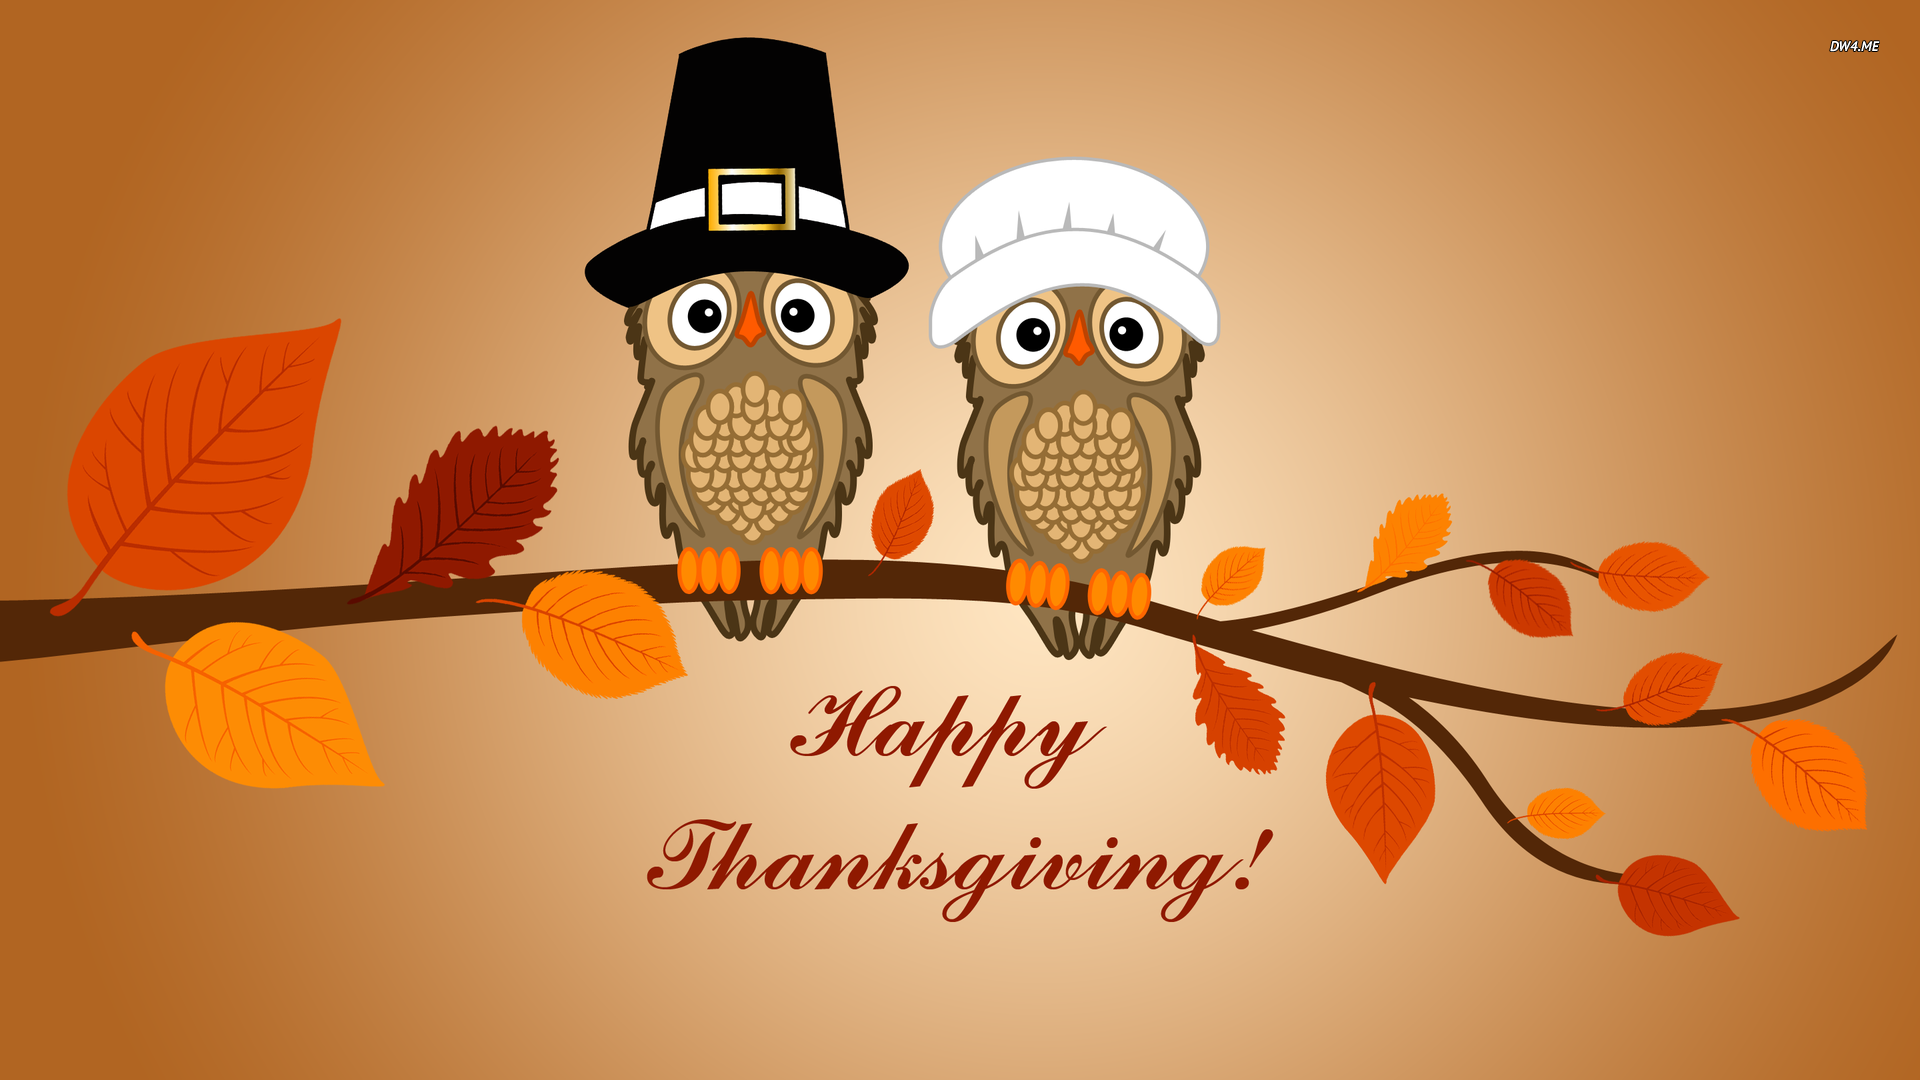 Free Happy Thanksgiving Image for Facebook [2020]